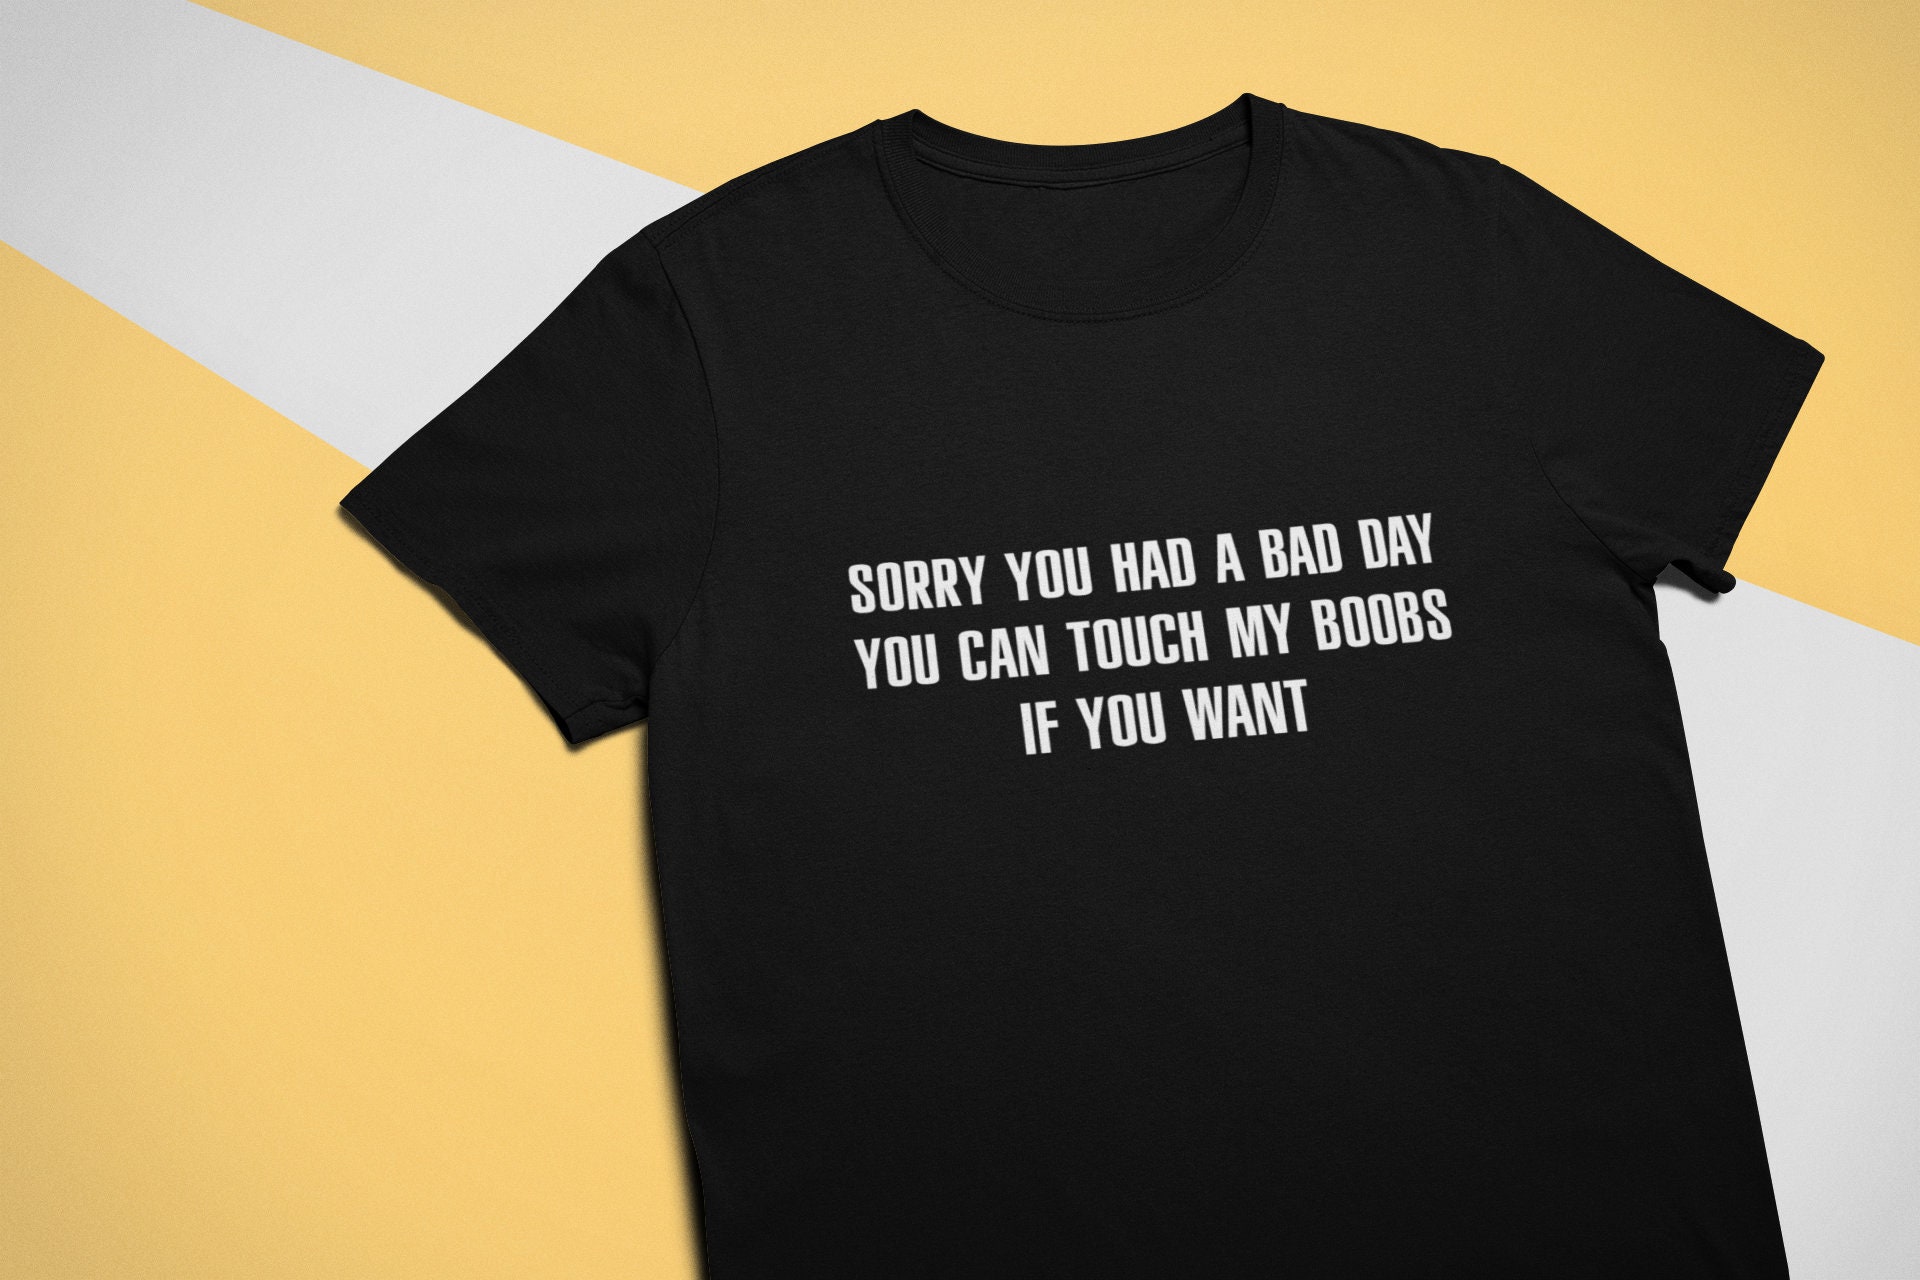 Sorry You Had A Bad Day. You Can Touch My Boobs If You Want. Ironic Sand  Sarcastic Shirt Gift, Meme Fury Humor, Unisex and Ladies T-shirt. 